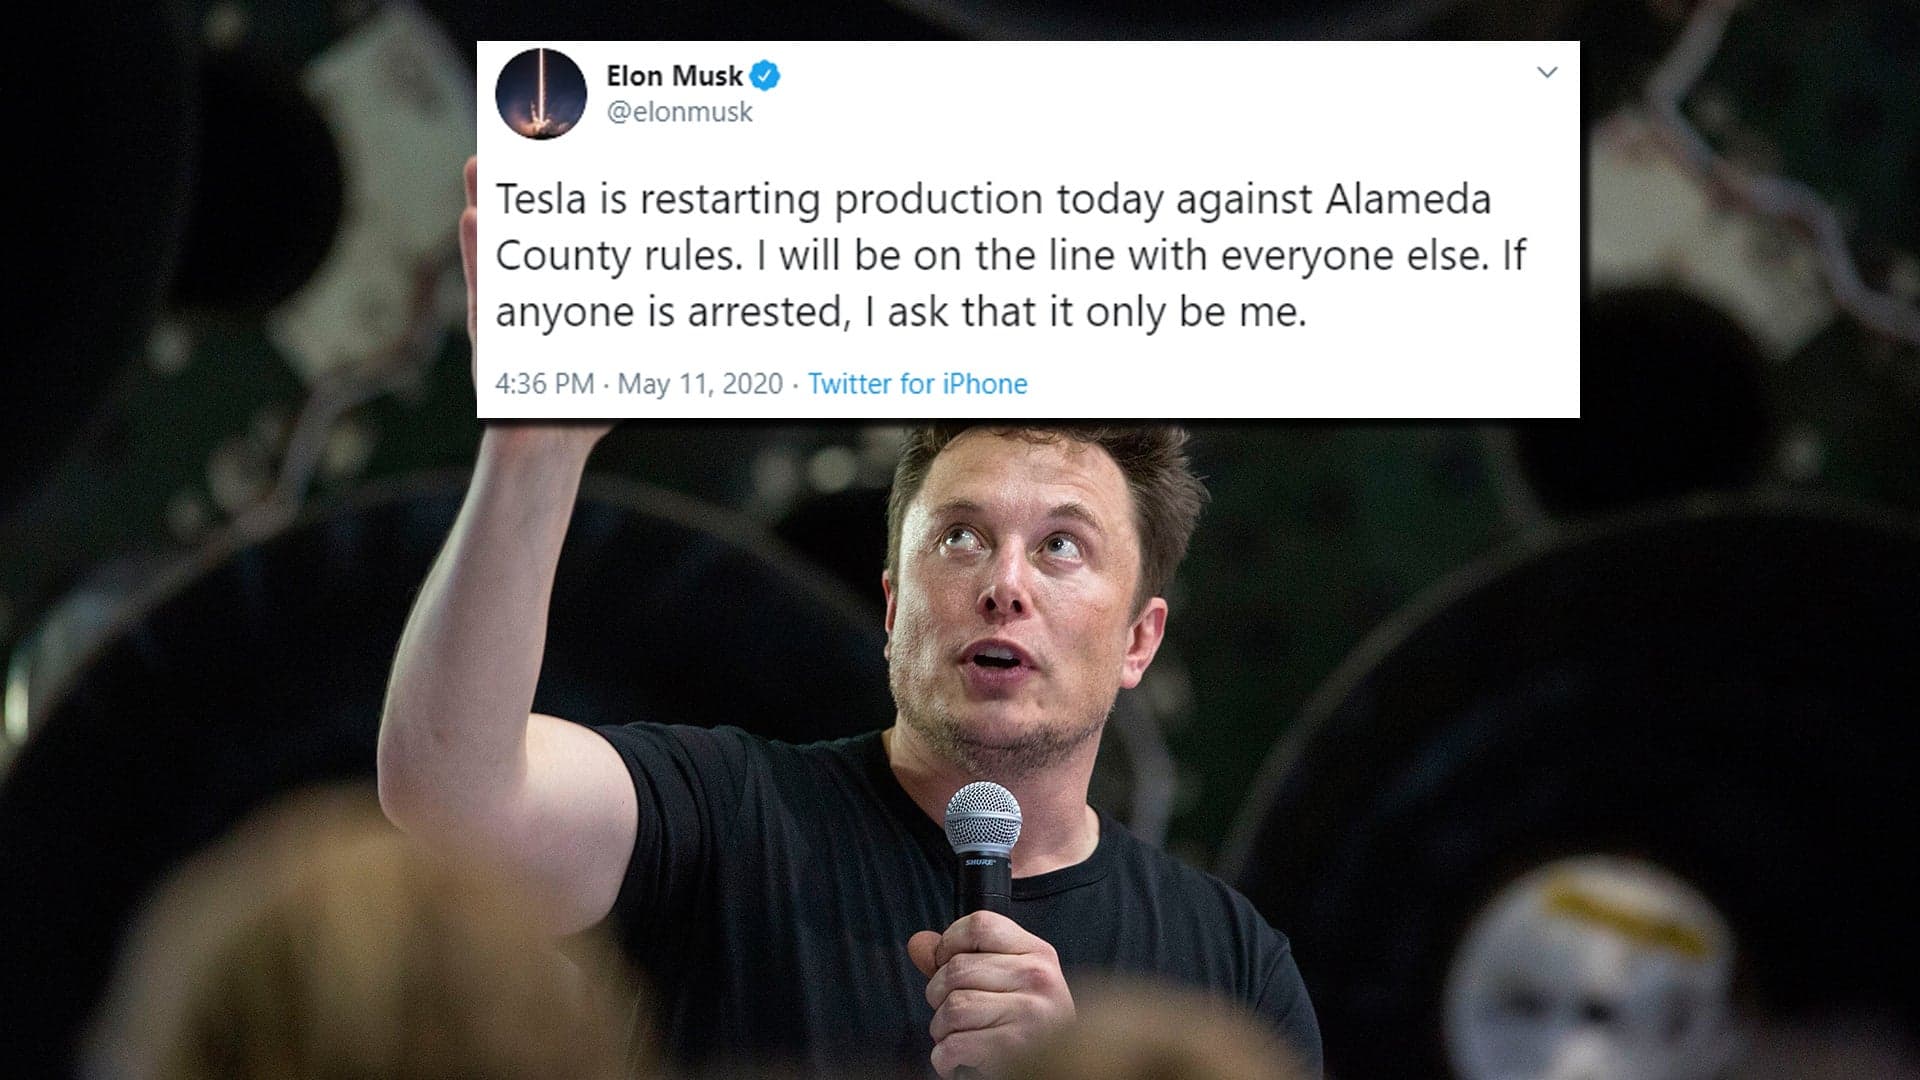 Elon Musk Asks to be Arrested As Tesla Resumes Vehicle Production in Defiance of Local Orders